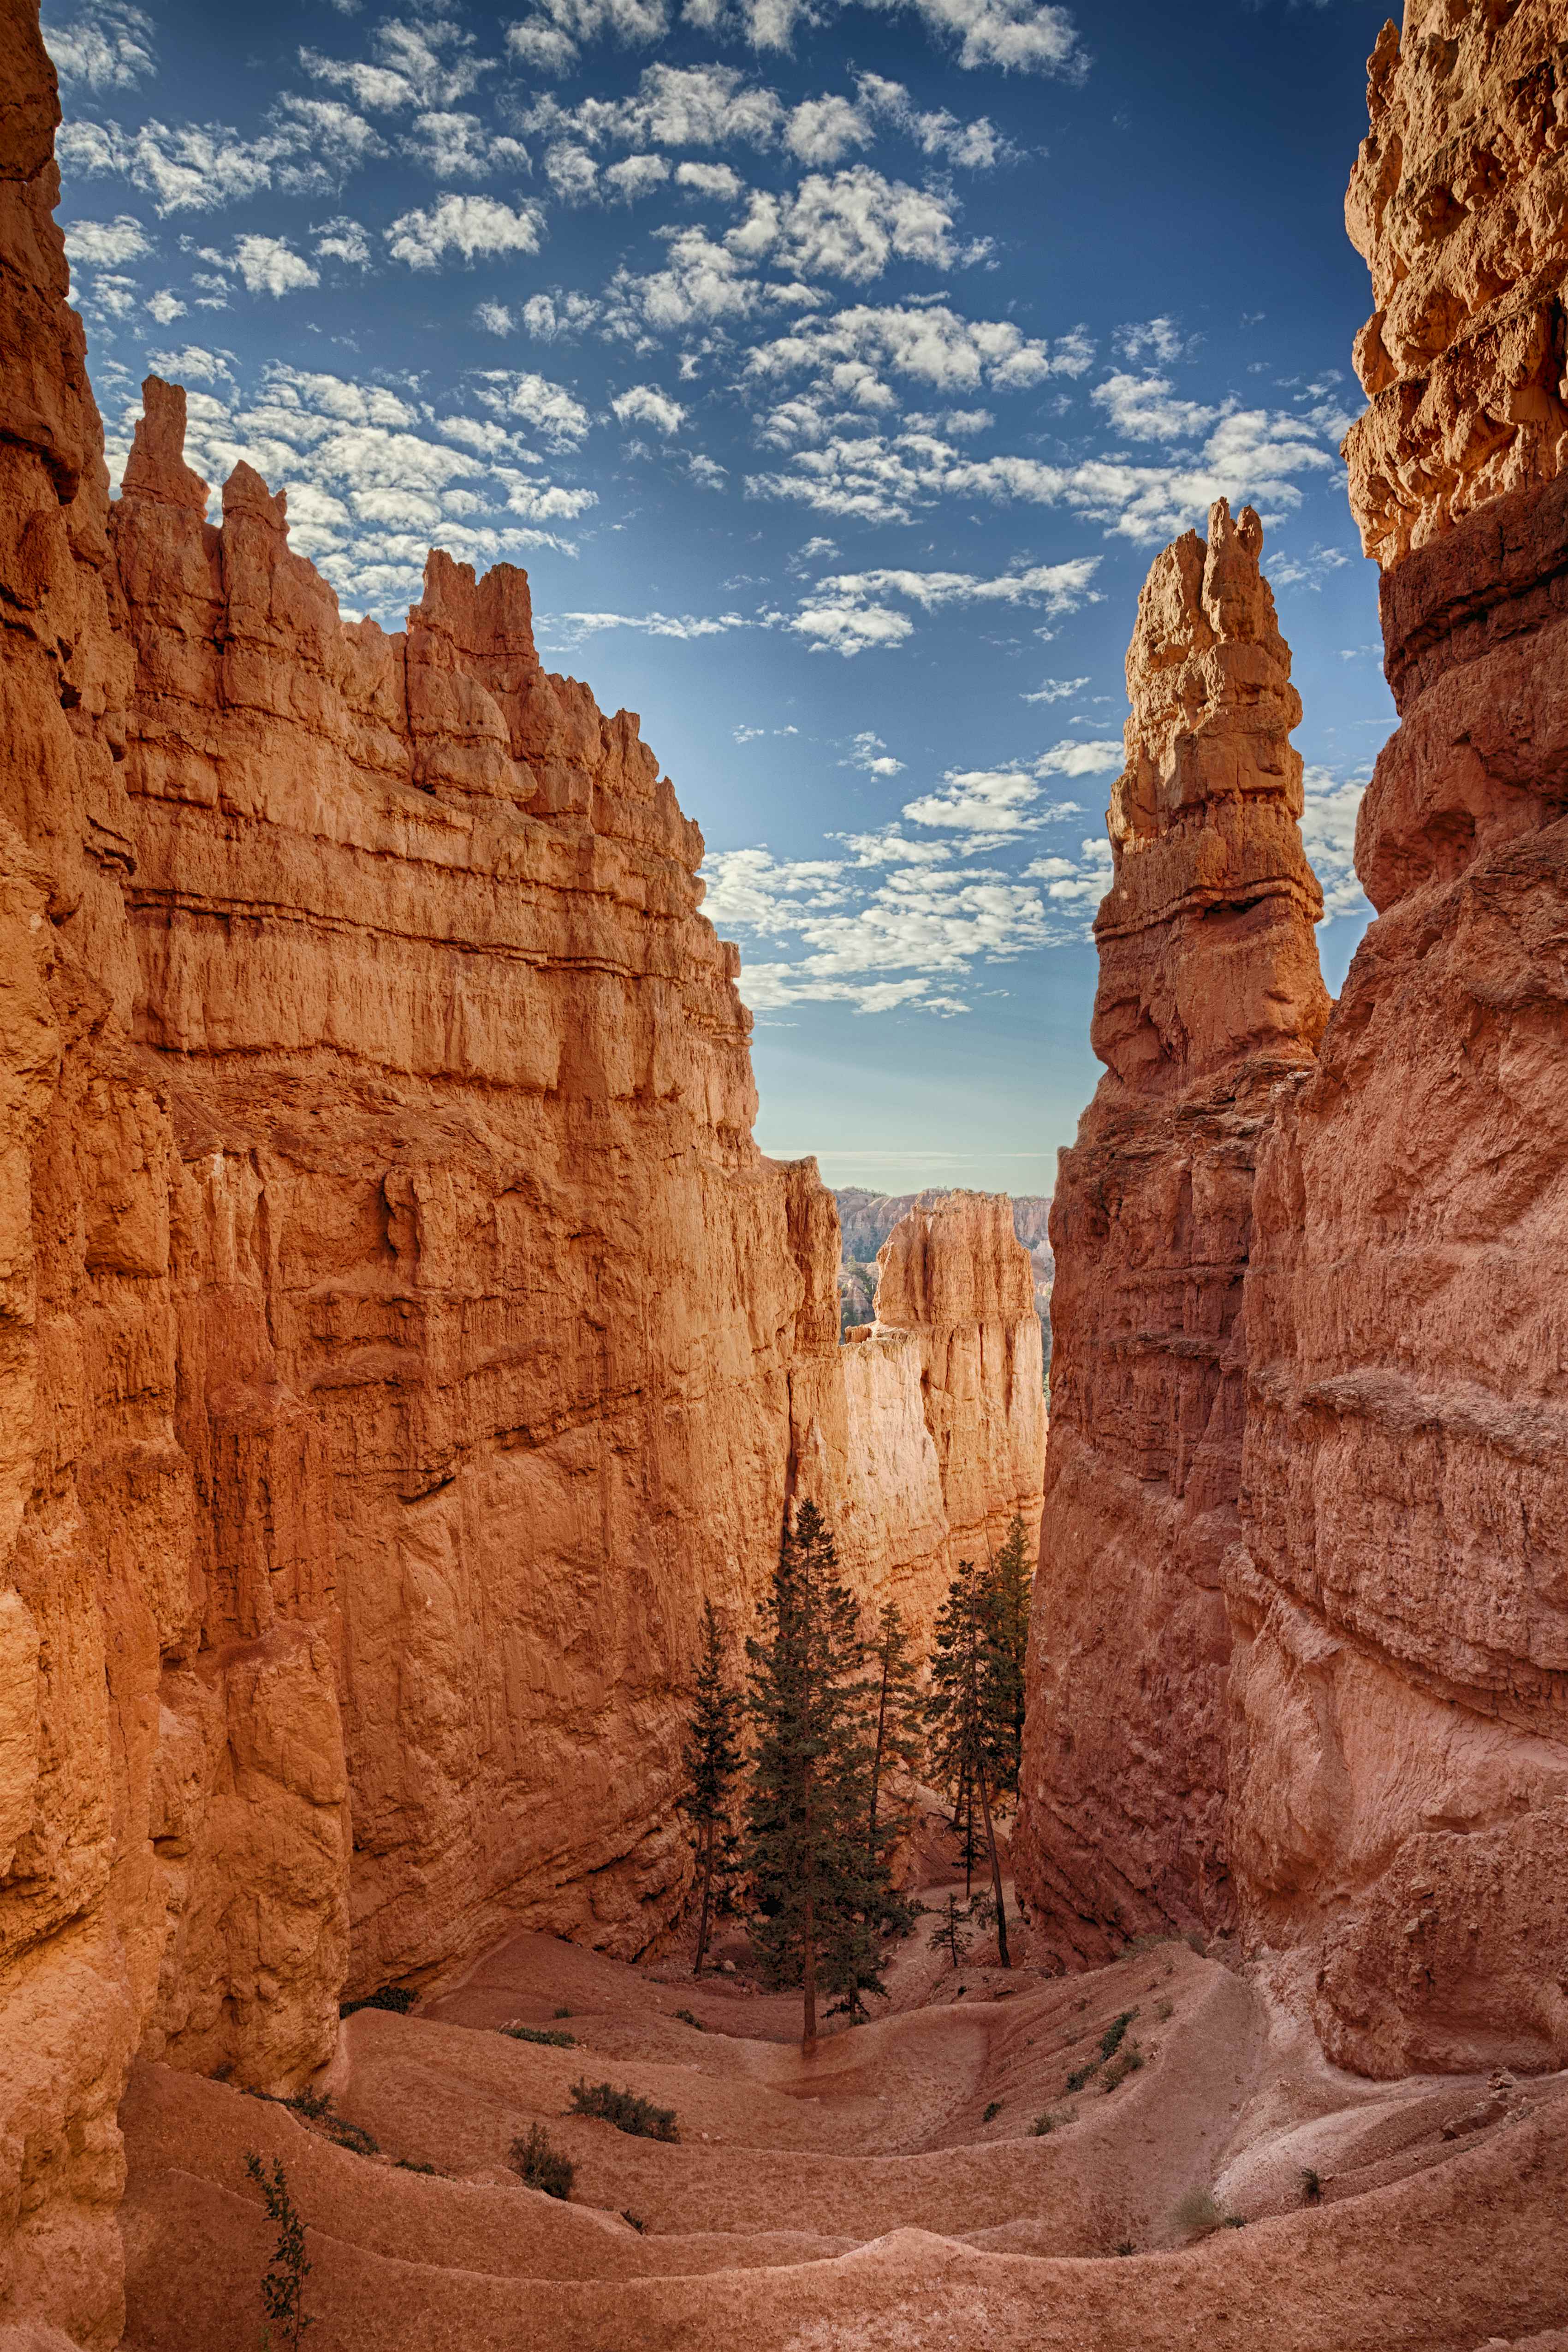 tours to national parks in utah